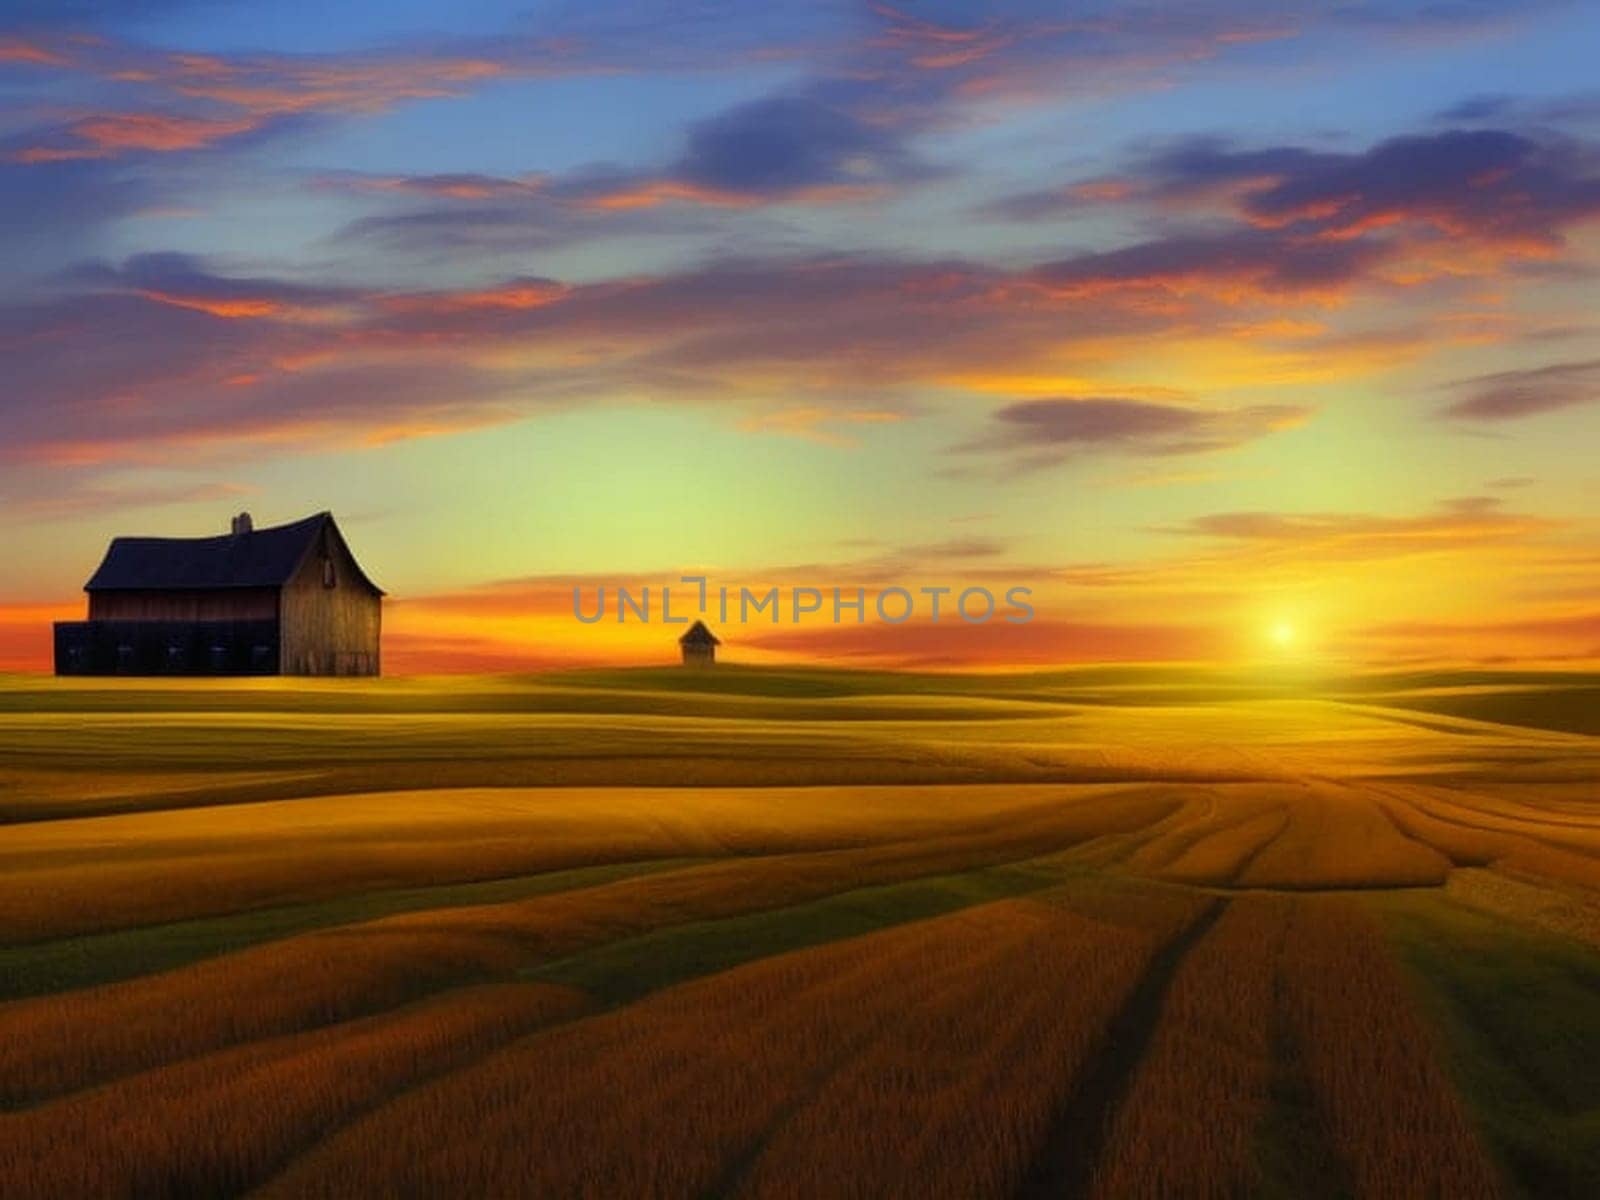 Witness the breathtaking beauty of a golden sunrise as it graces the picturesque Tuscan countryside with its radiant glow. Immerse yourself in the tranquil ambiance of this AI-generated image, capturing the essence of rural life with its sprawling farms, charming farmhouses, and verdant fields. Let the ethereal hues of the landscape transport you to a realm of serenity and natural splendor.